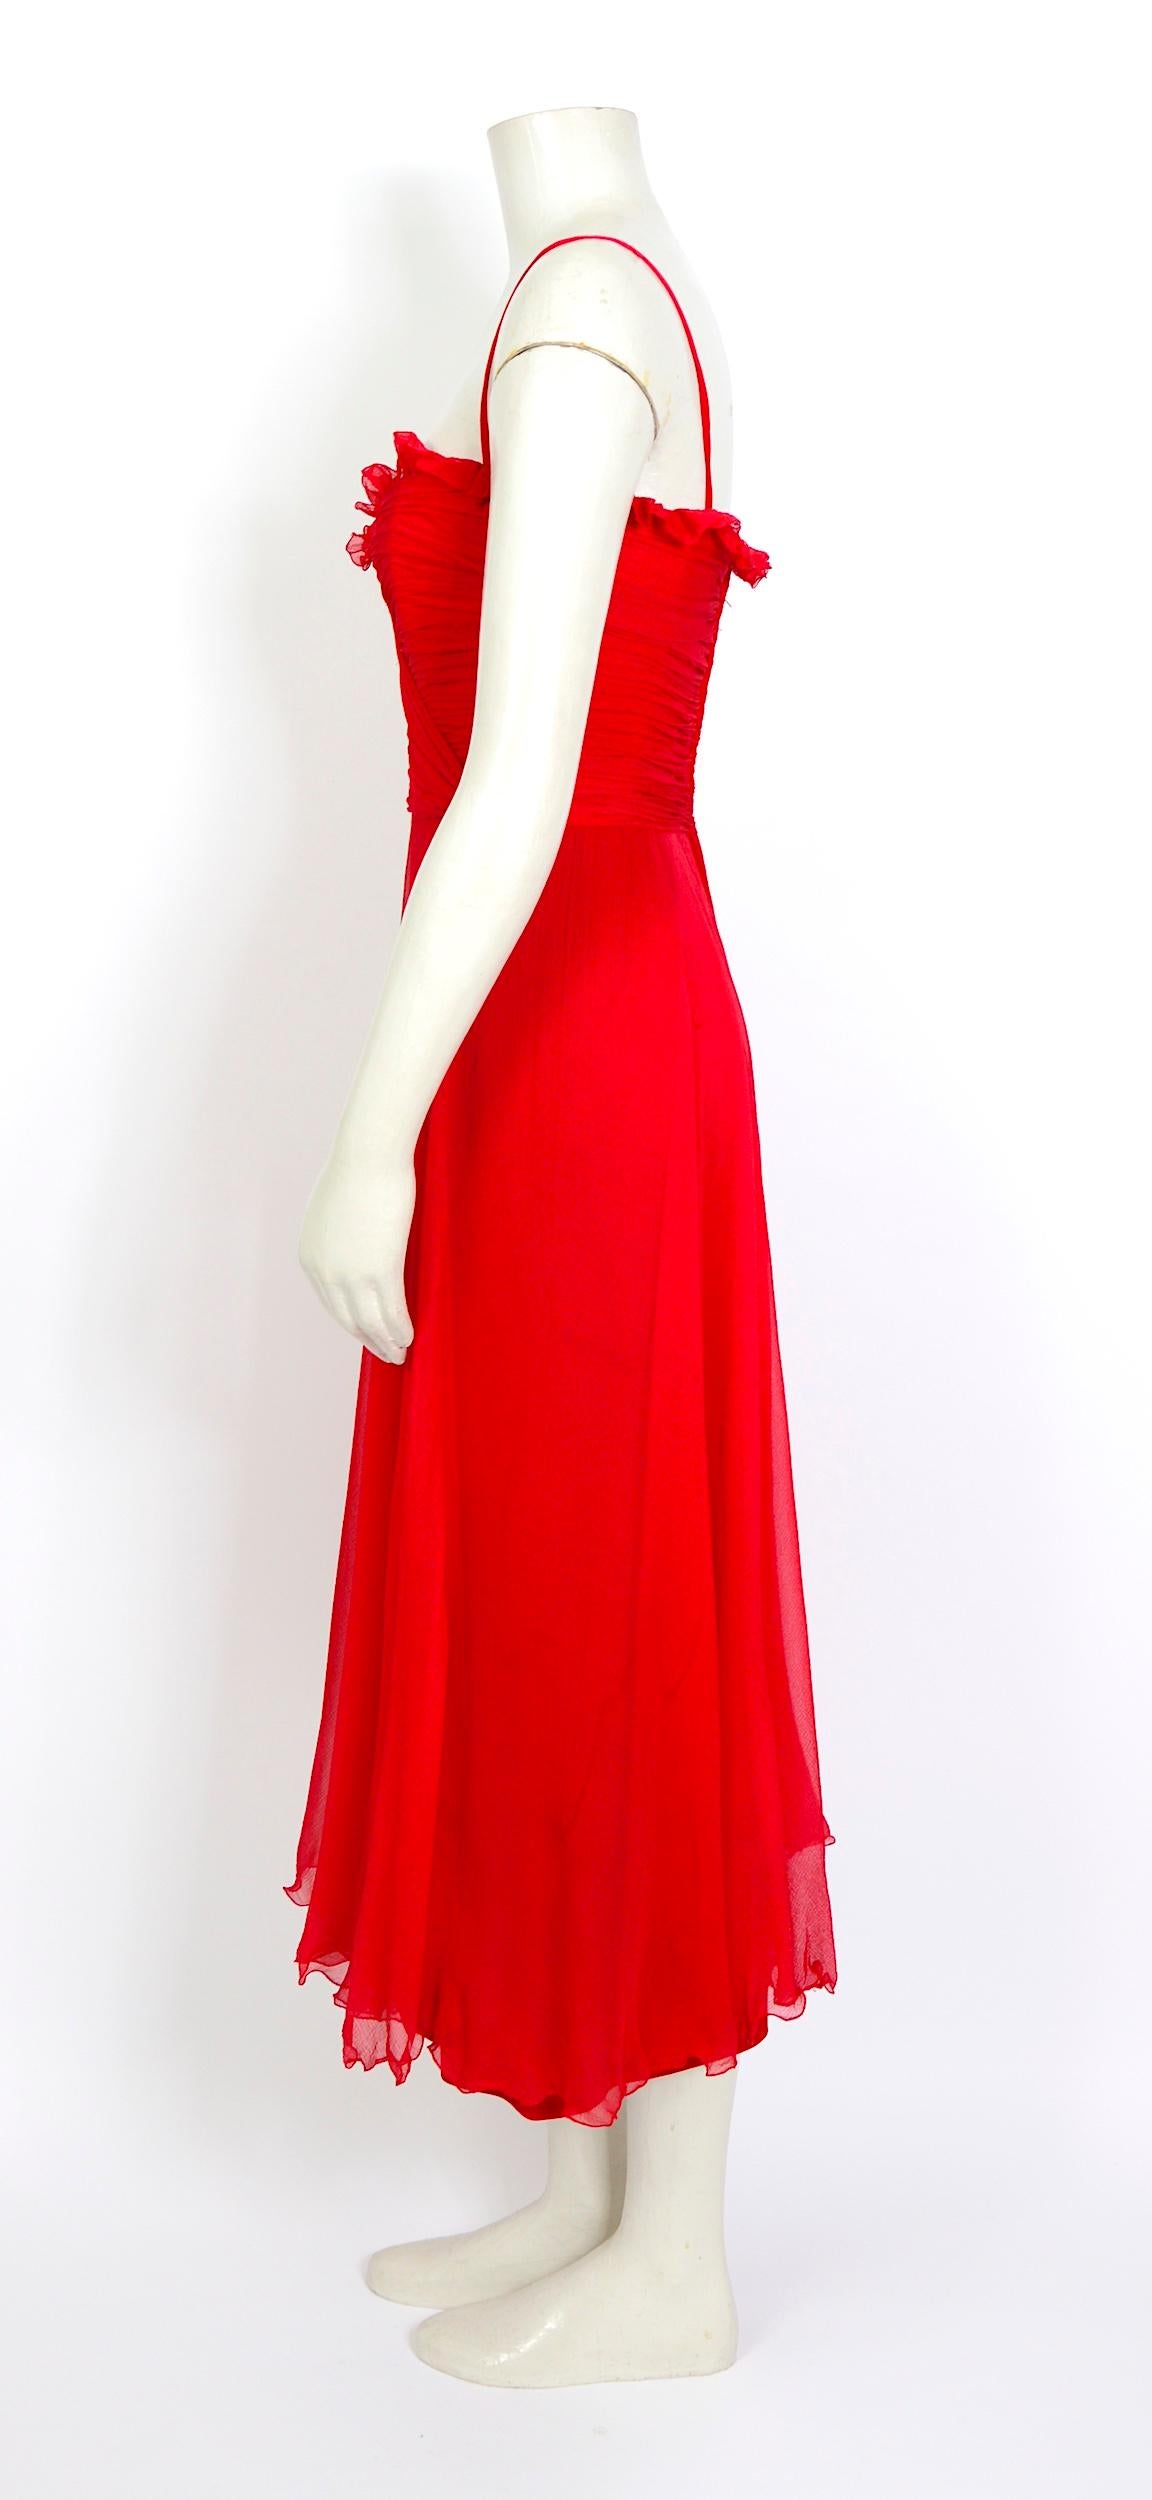 Loris Azzaro 1970s vintage collectors red silk chiffon draped bodice dress In Excellent Condition For Sale In Antwerpen, Vlaams Gewest